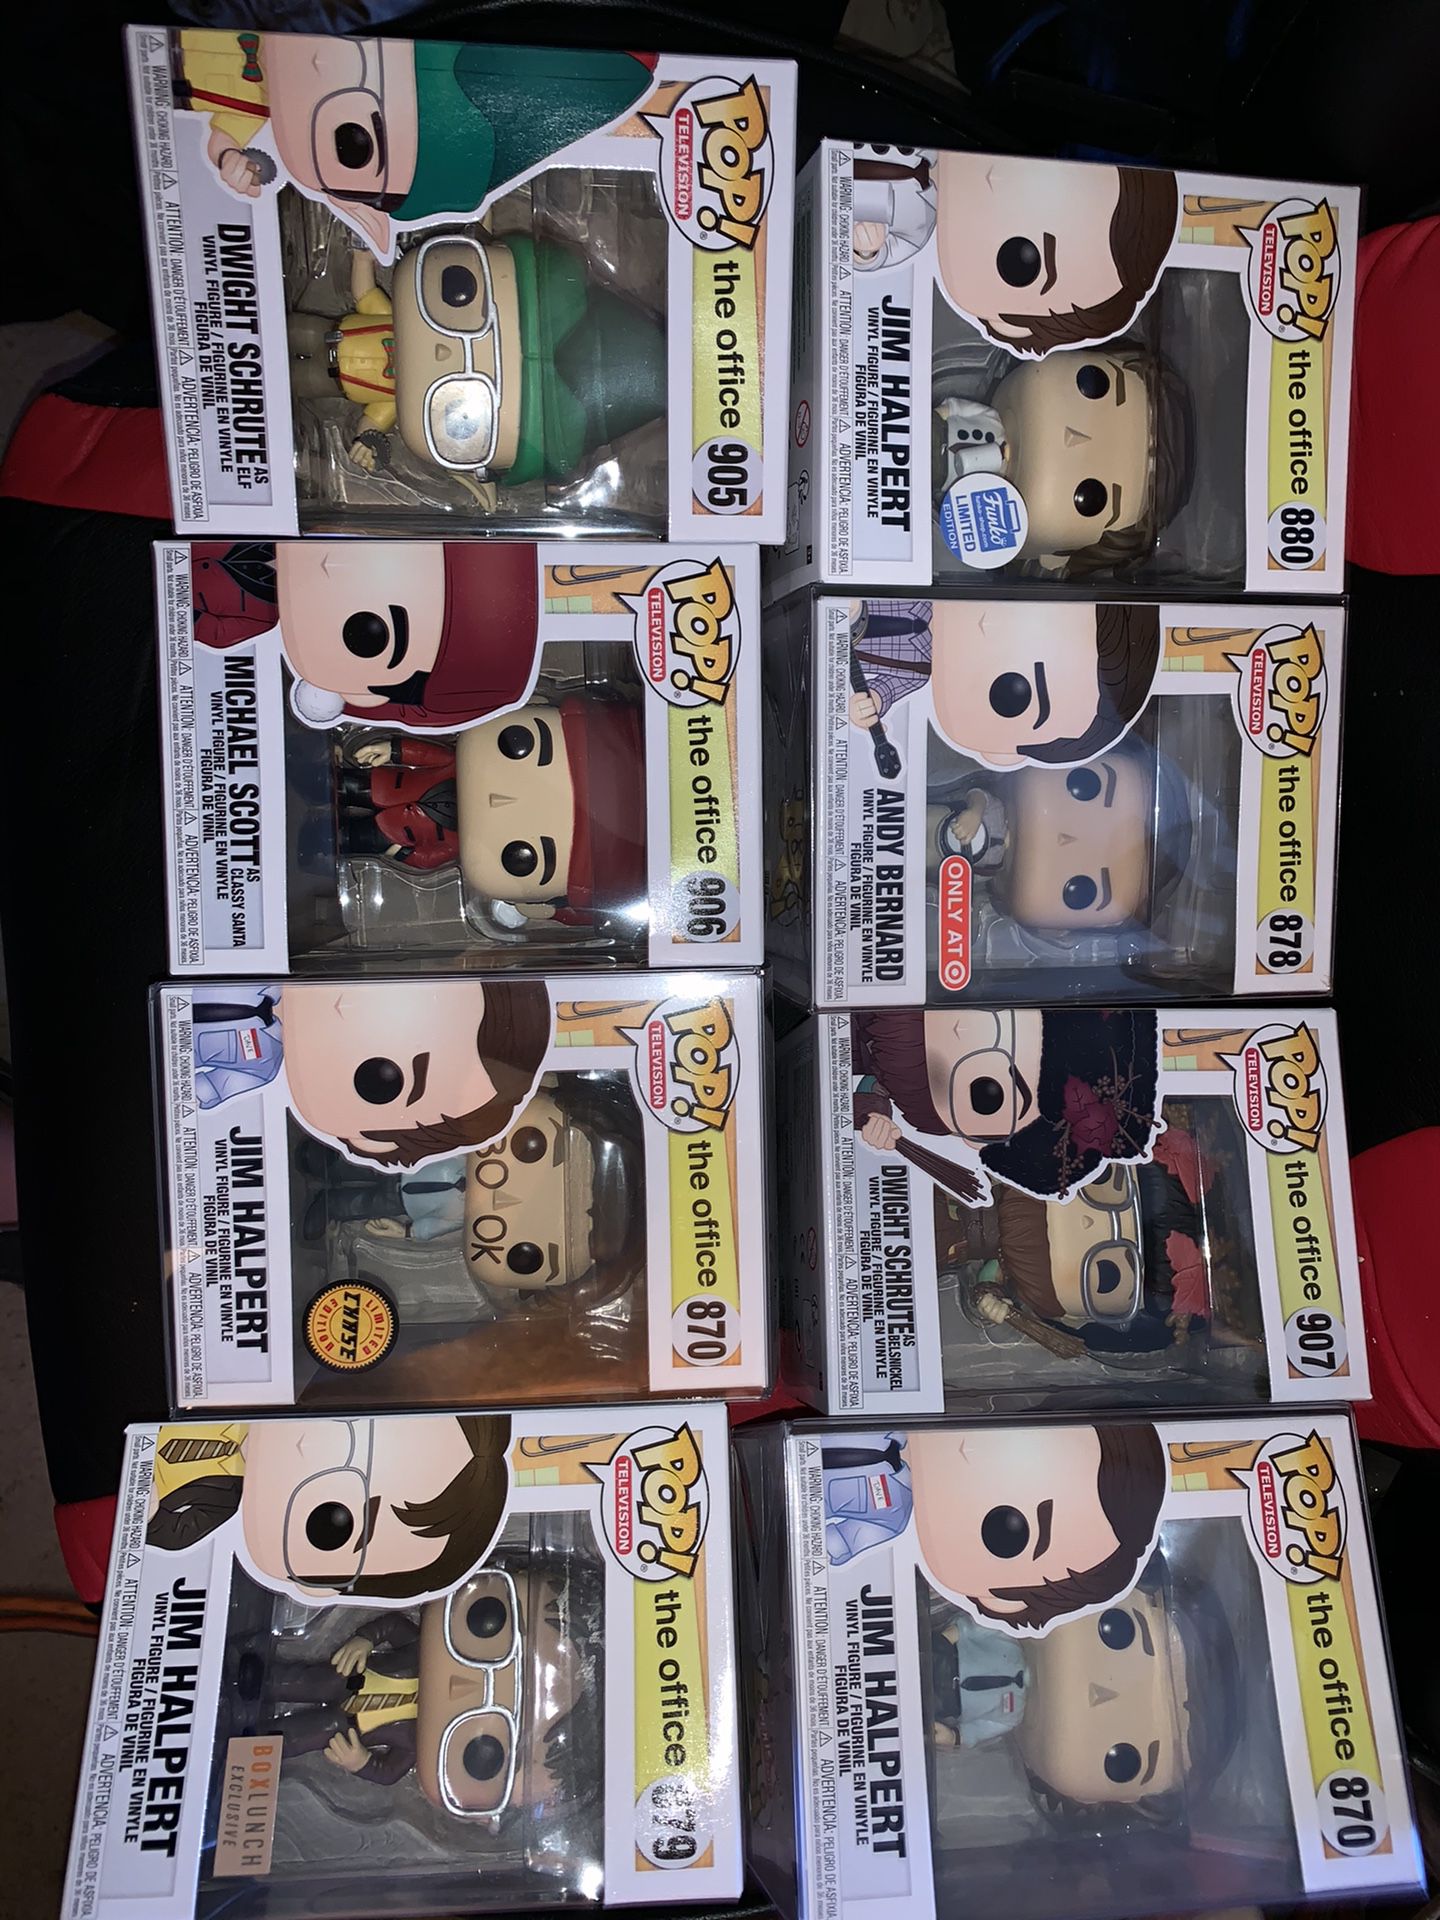 The office pops, game of thrones pops, rugrats pops, avatar the last air bender pops, and others